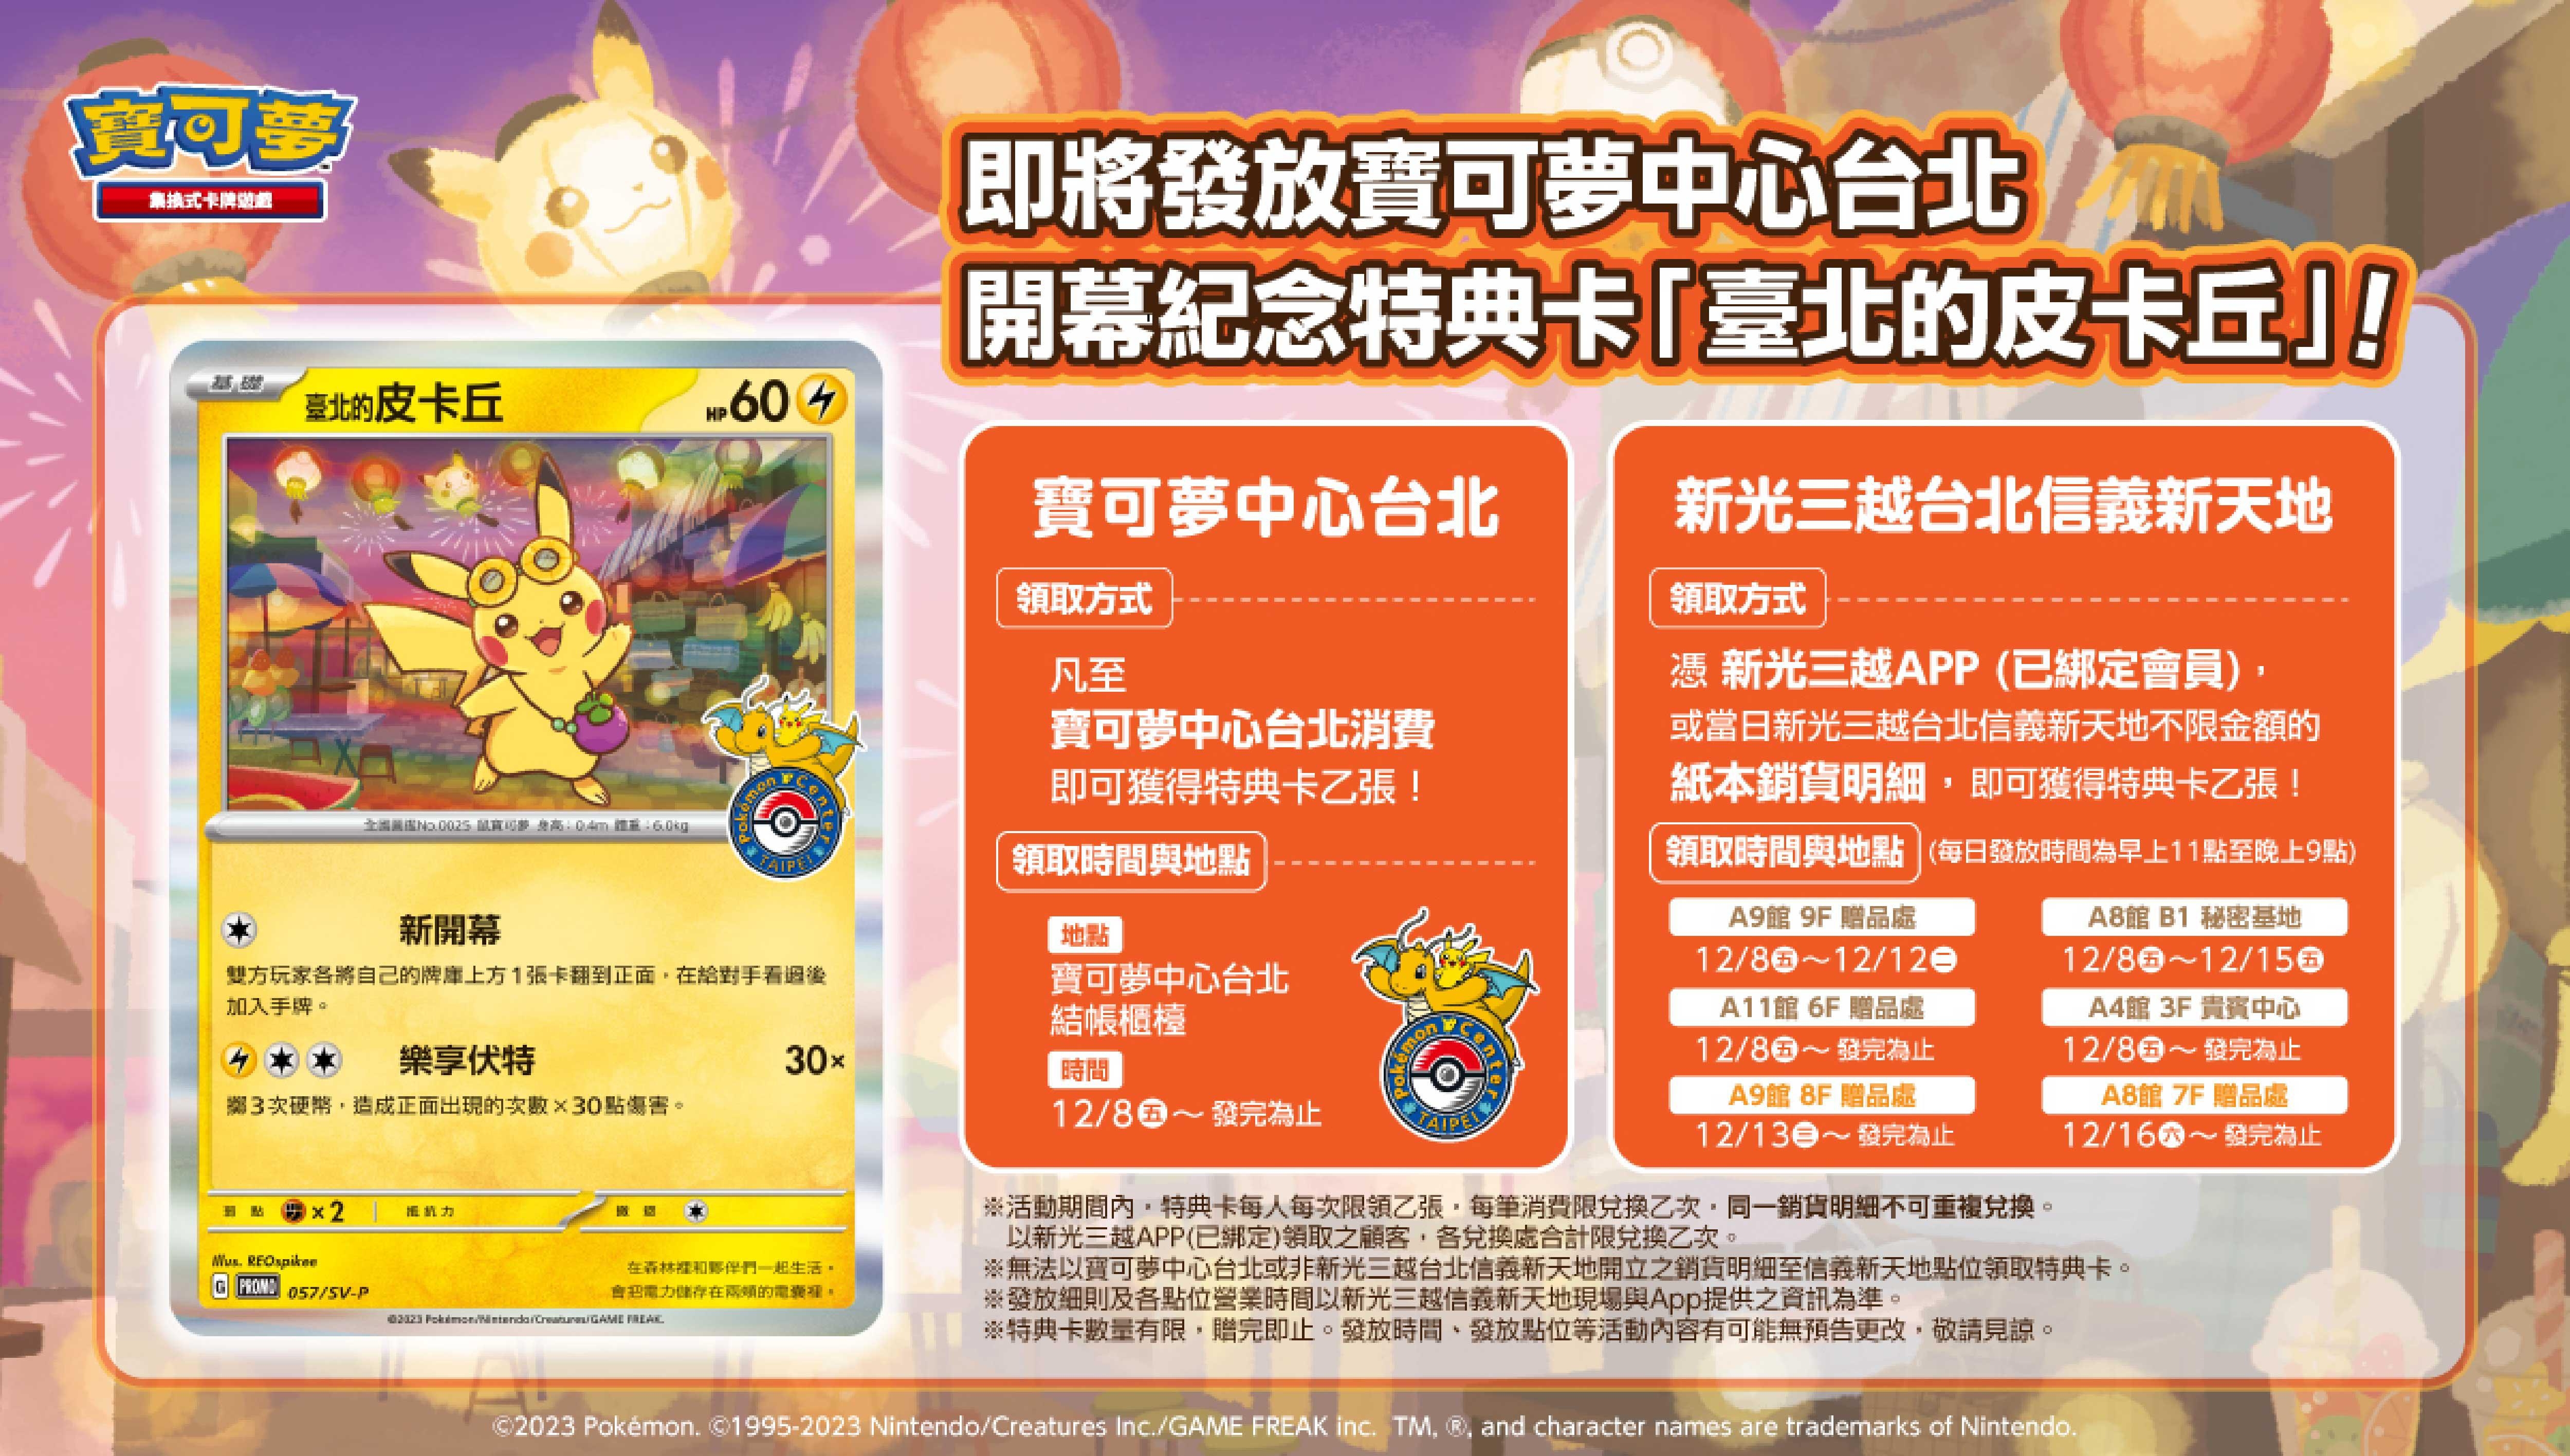 Chinese language infographic on the methods of receiving the Taipei's Pikachu promotional card